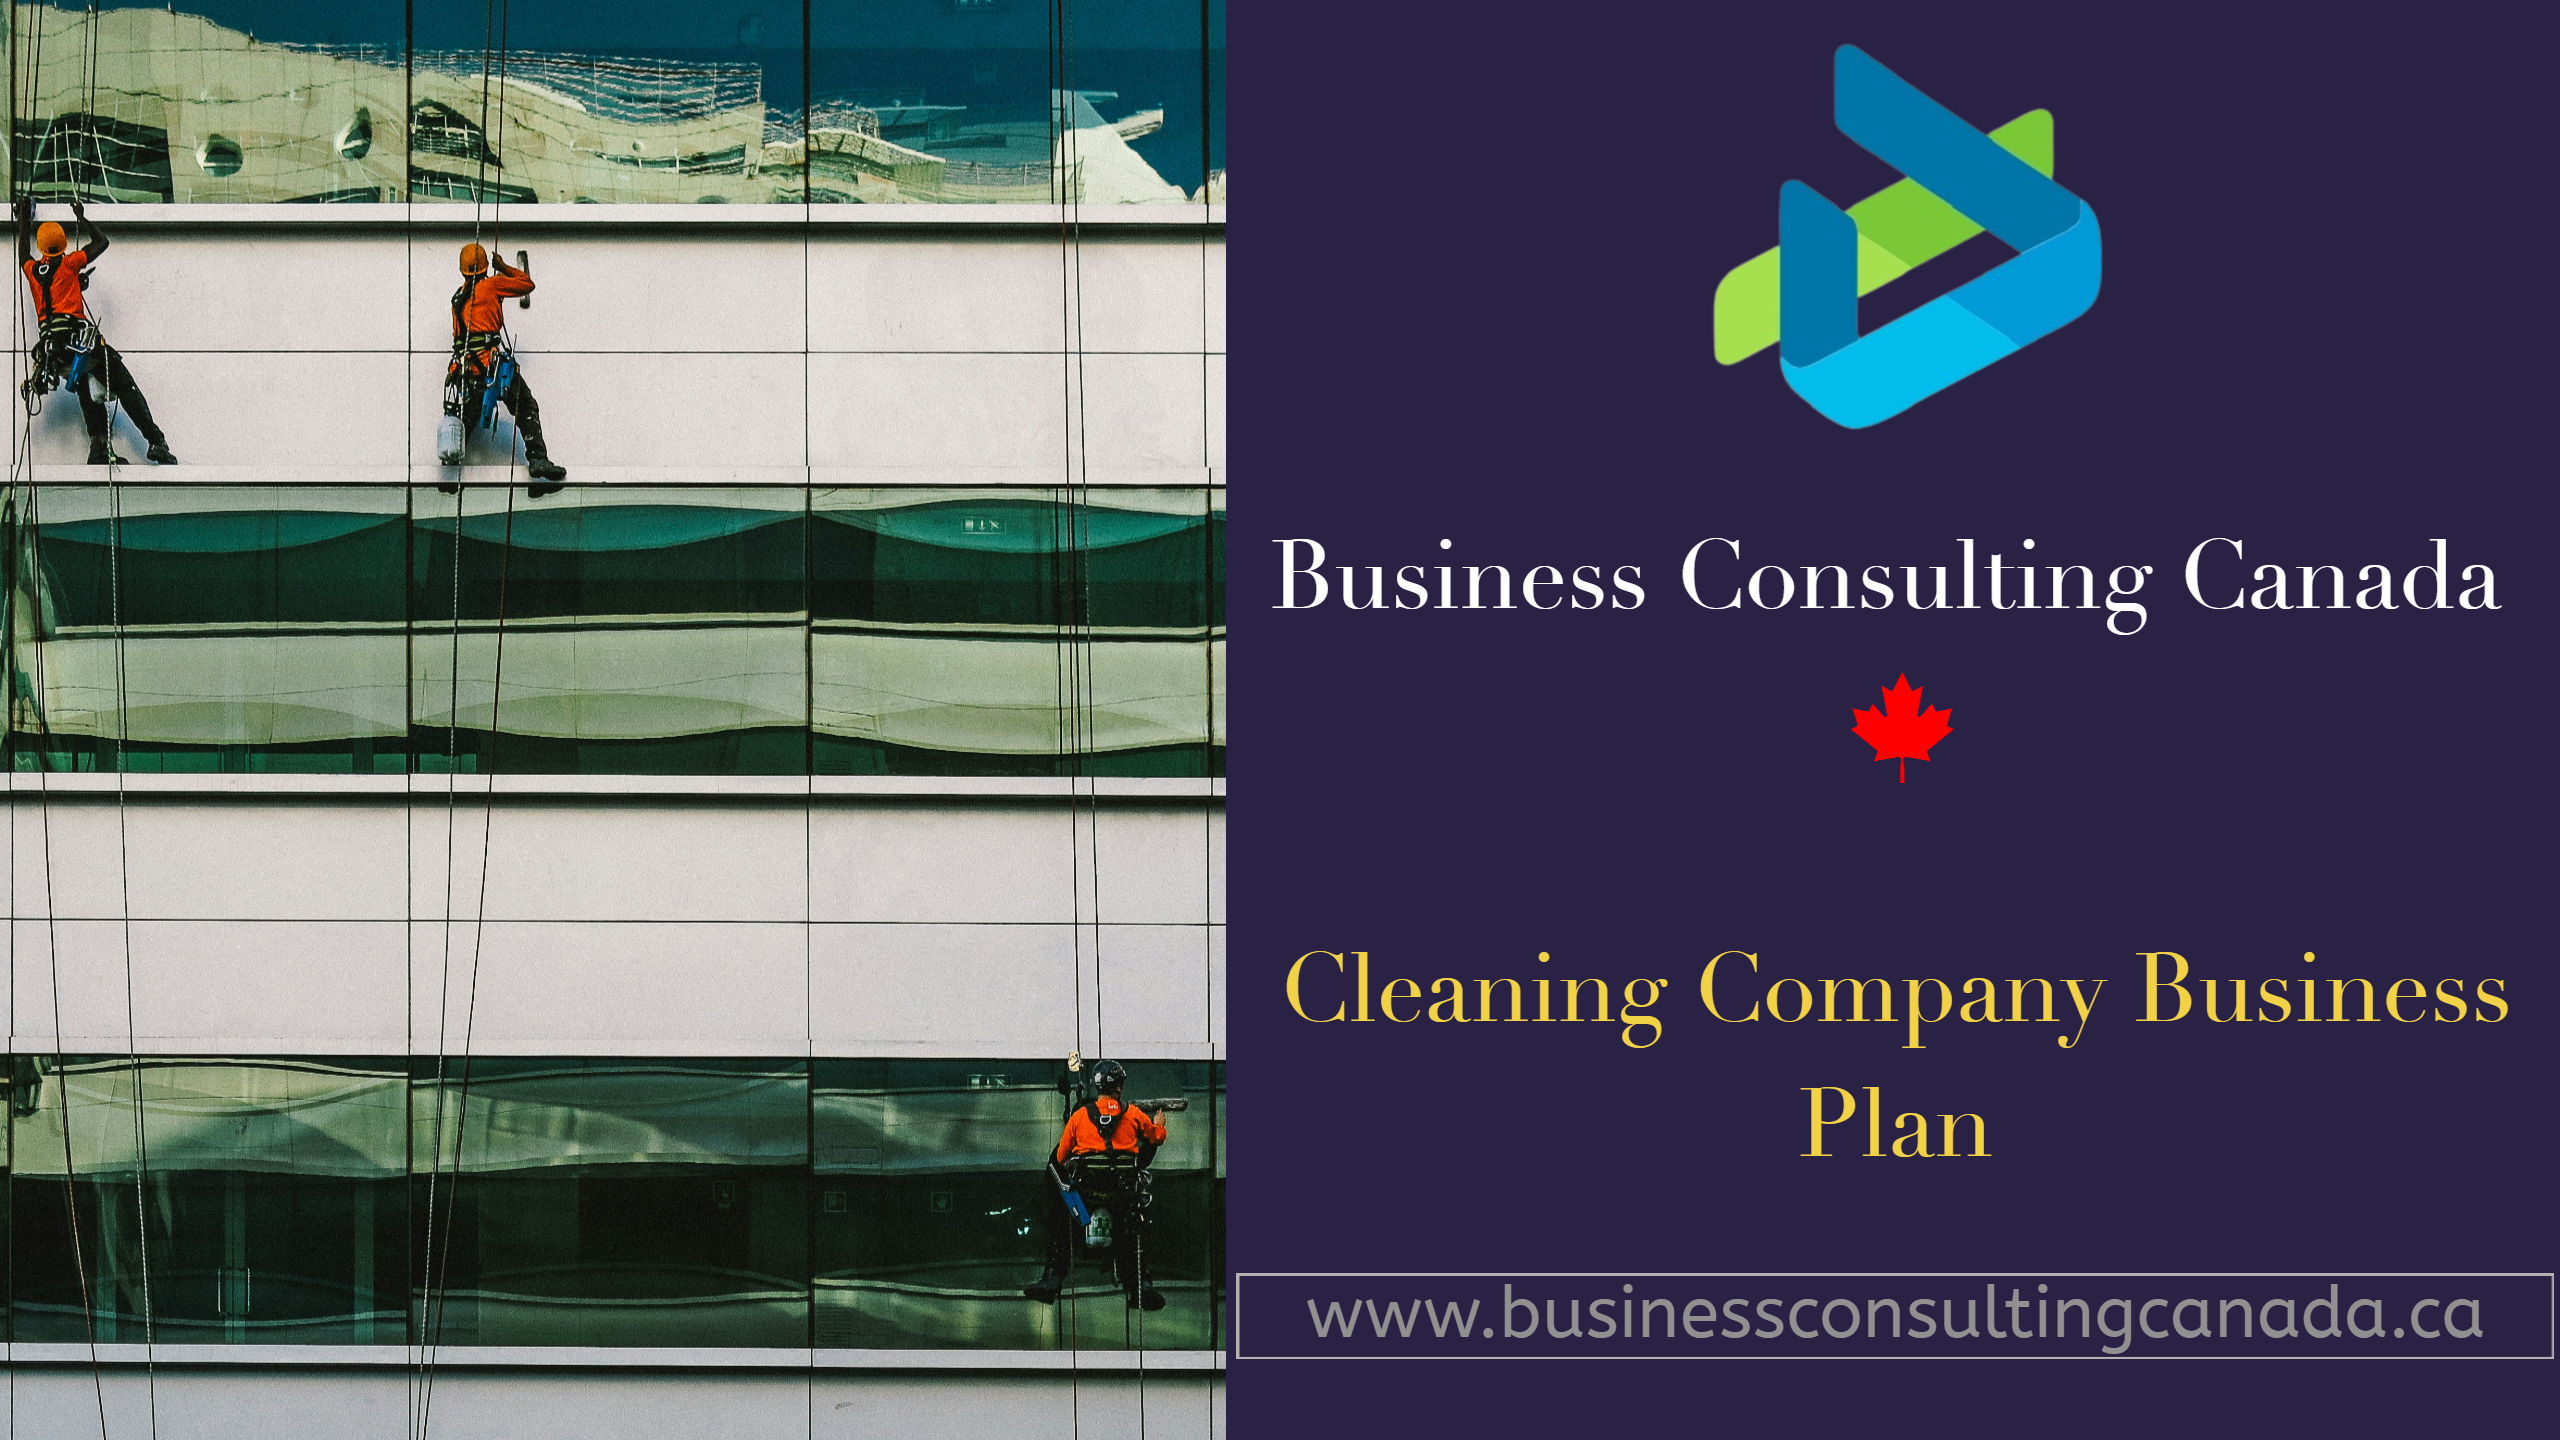 Cleaning Company Business Plan